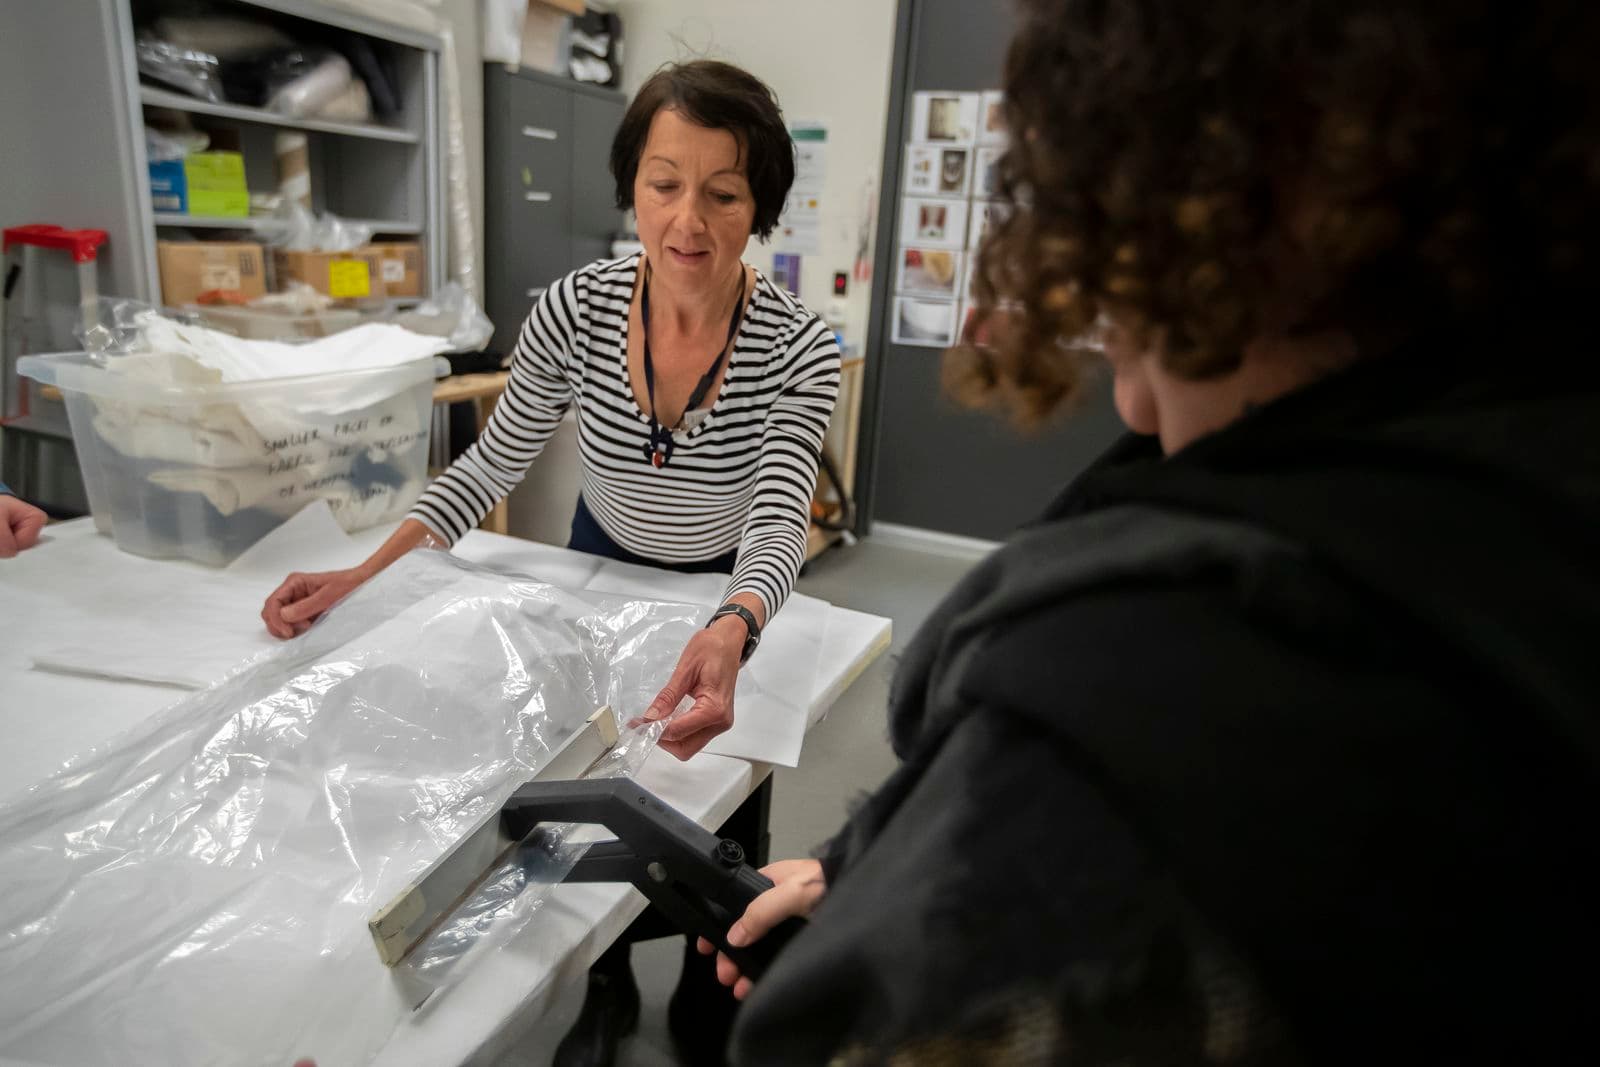 Two women enclose a paper-wrapped object in a plastic bag to undergo preventative conservation